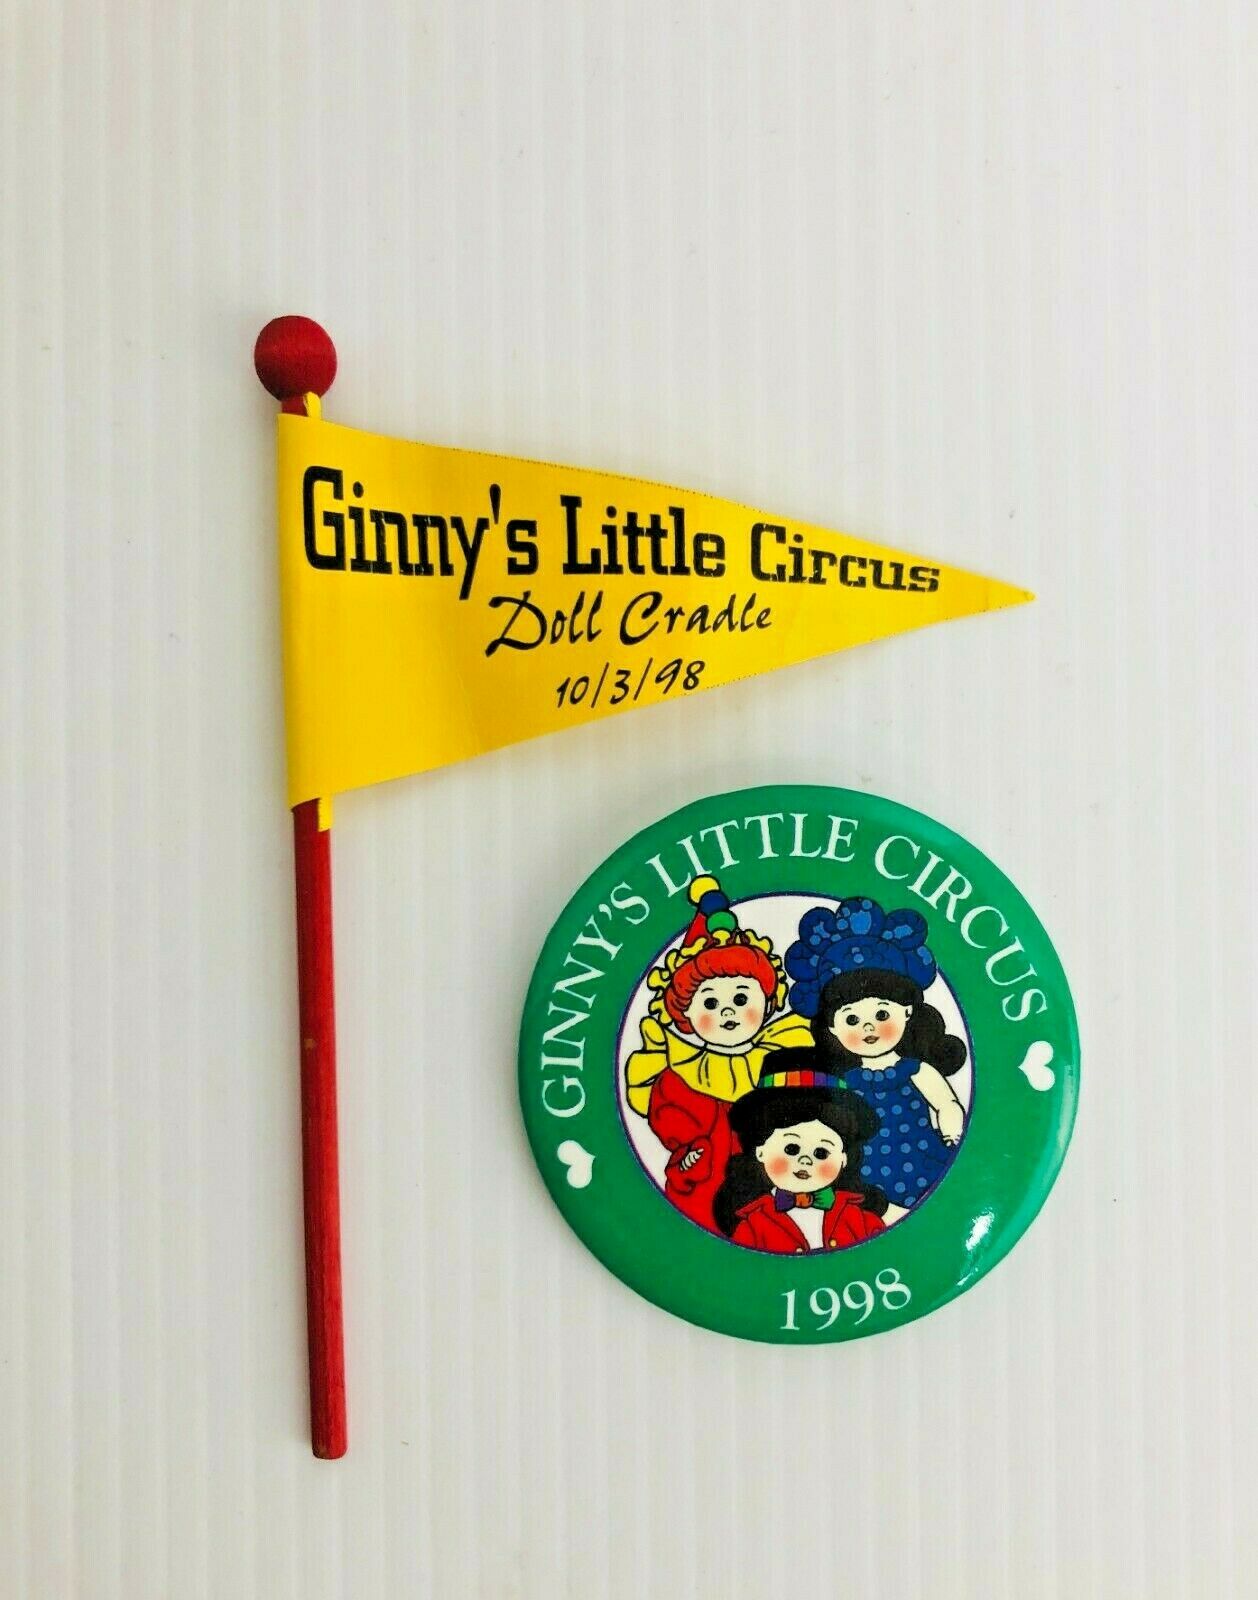 Ginny's Little Circus Promotional Button And Flag 1998 Vogue